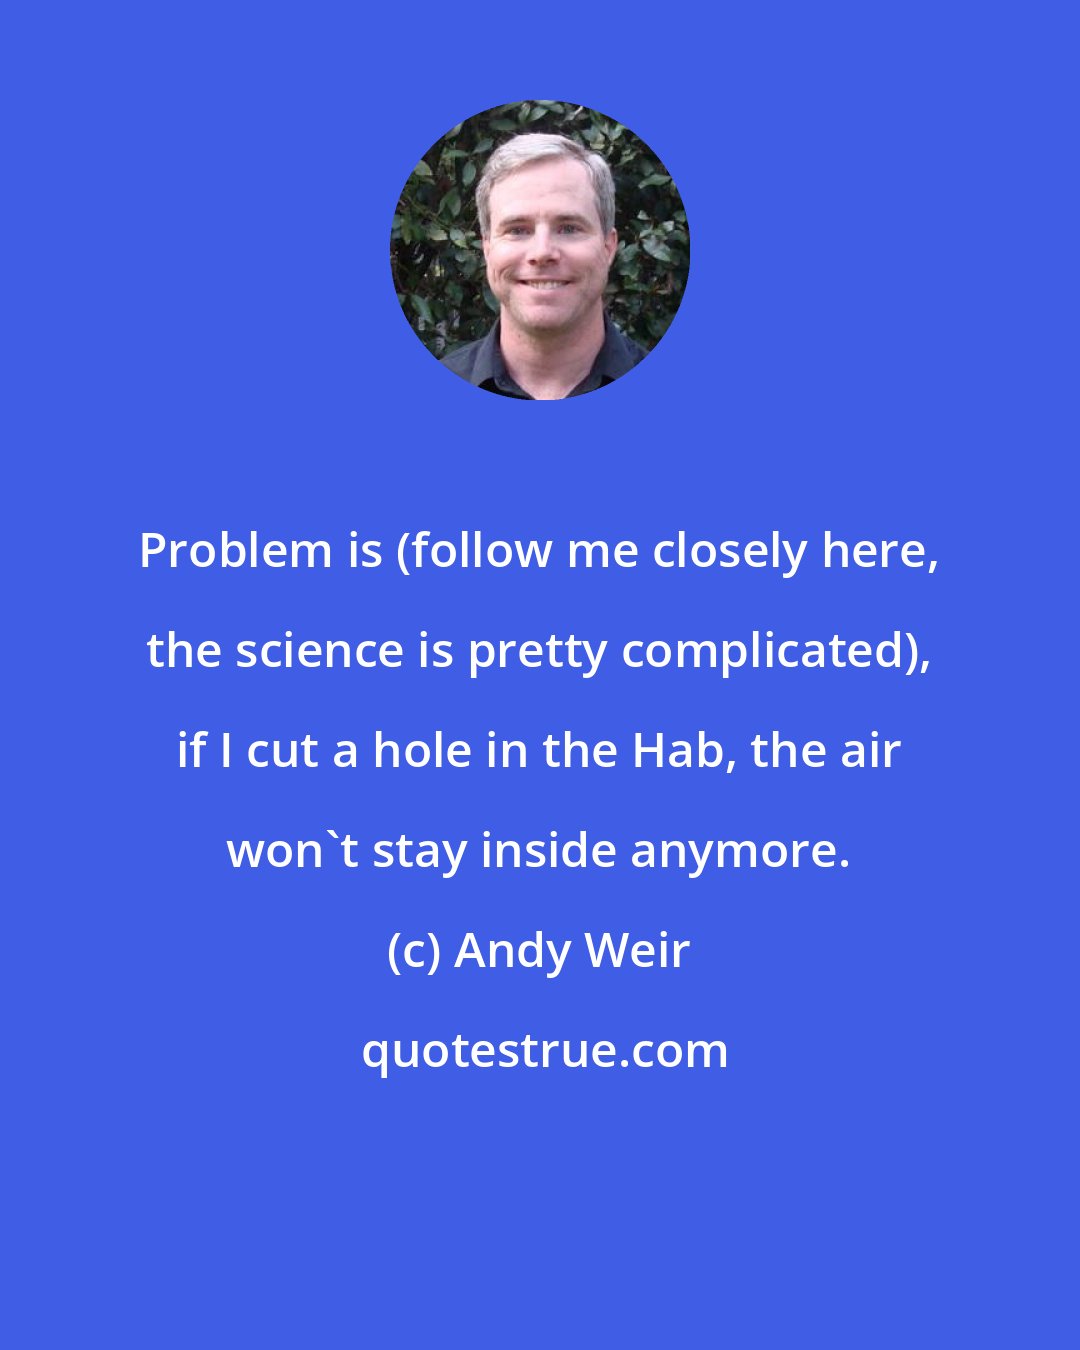 Andy Weir: Problem is (follow me closely here, the science is pretty complicated), if I cut a hole in the Hab, the air won't stay inside anymore.